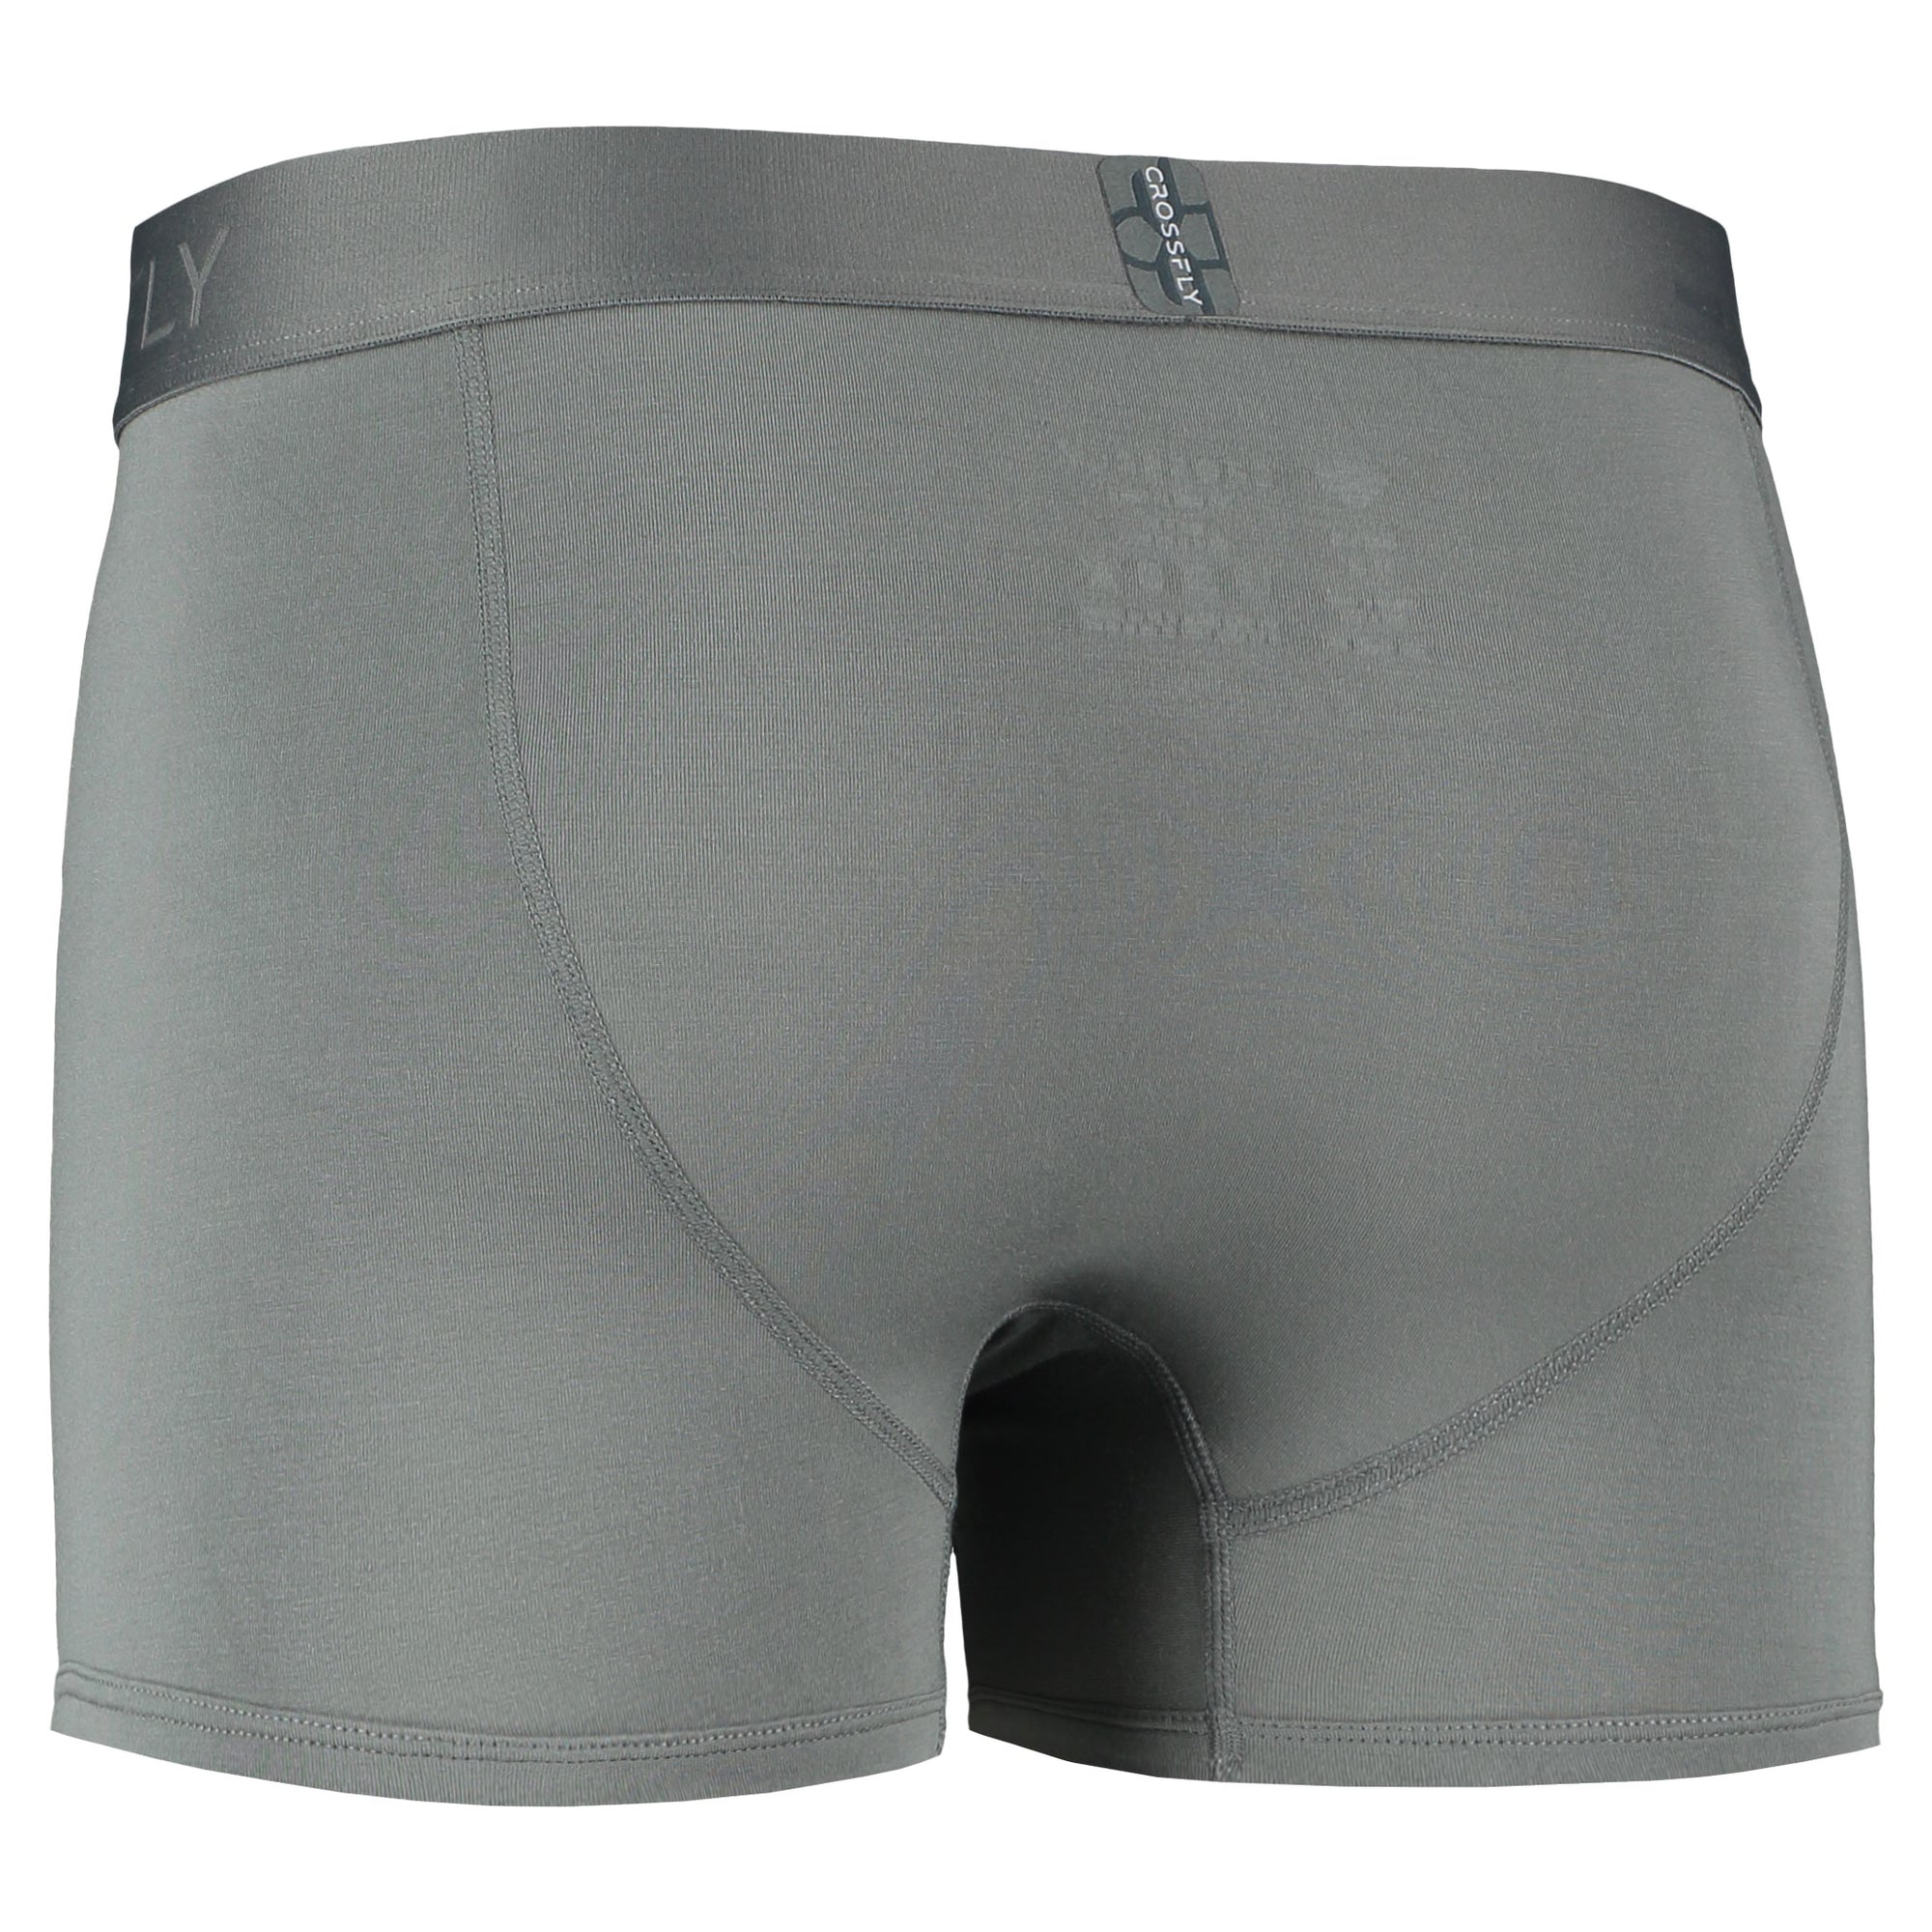 Crossfly men's IKON 3" charcoal trunks from the Everyday series, featuring X-Fly and Coccoon internal pocket support.